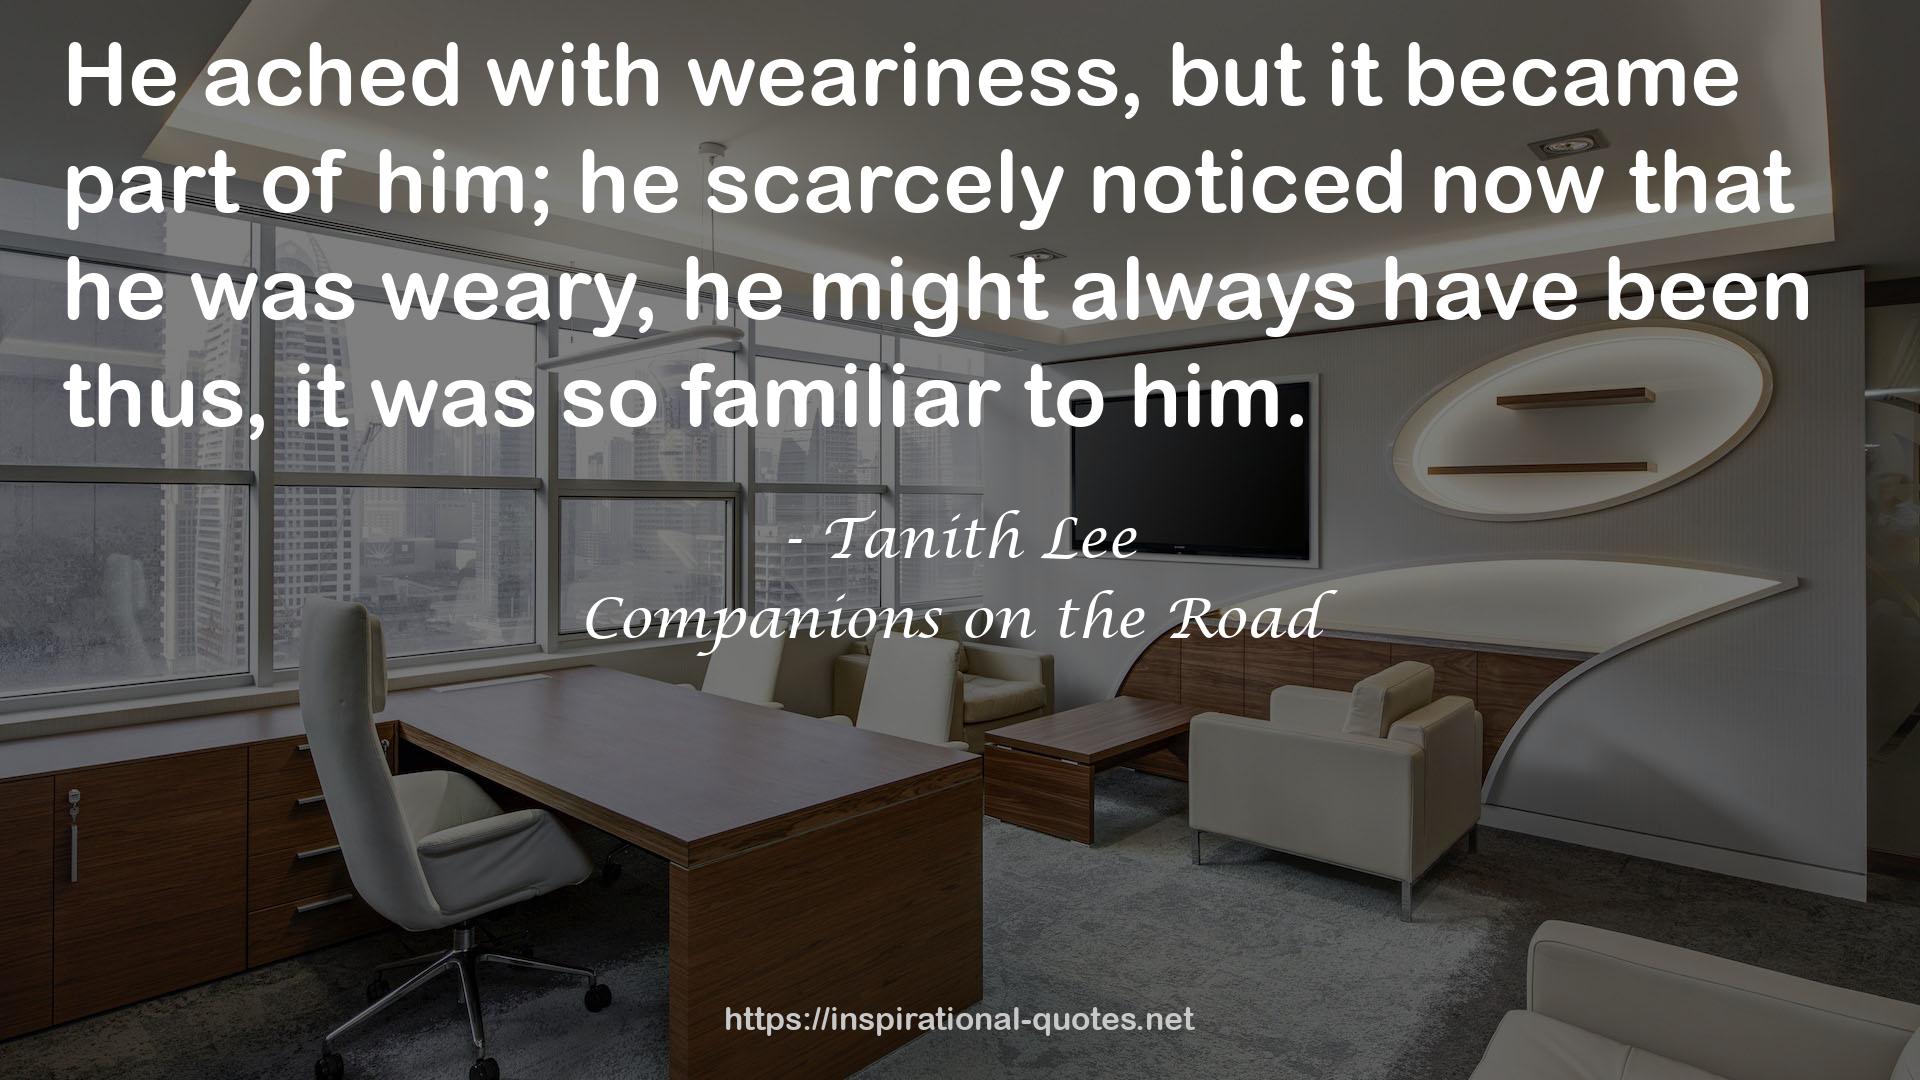 Companions on the Road QUOTES